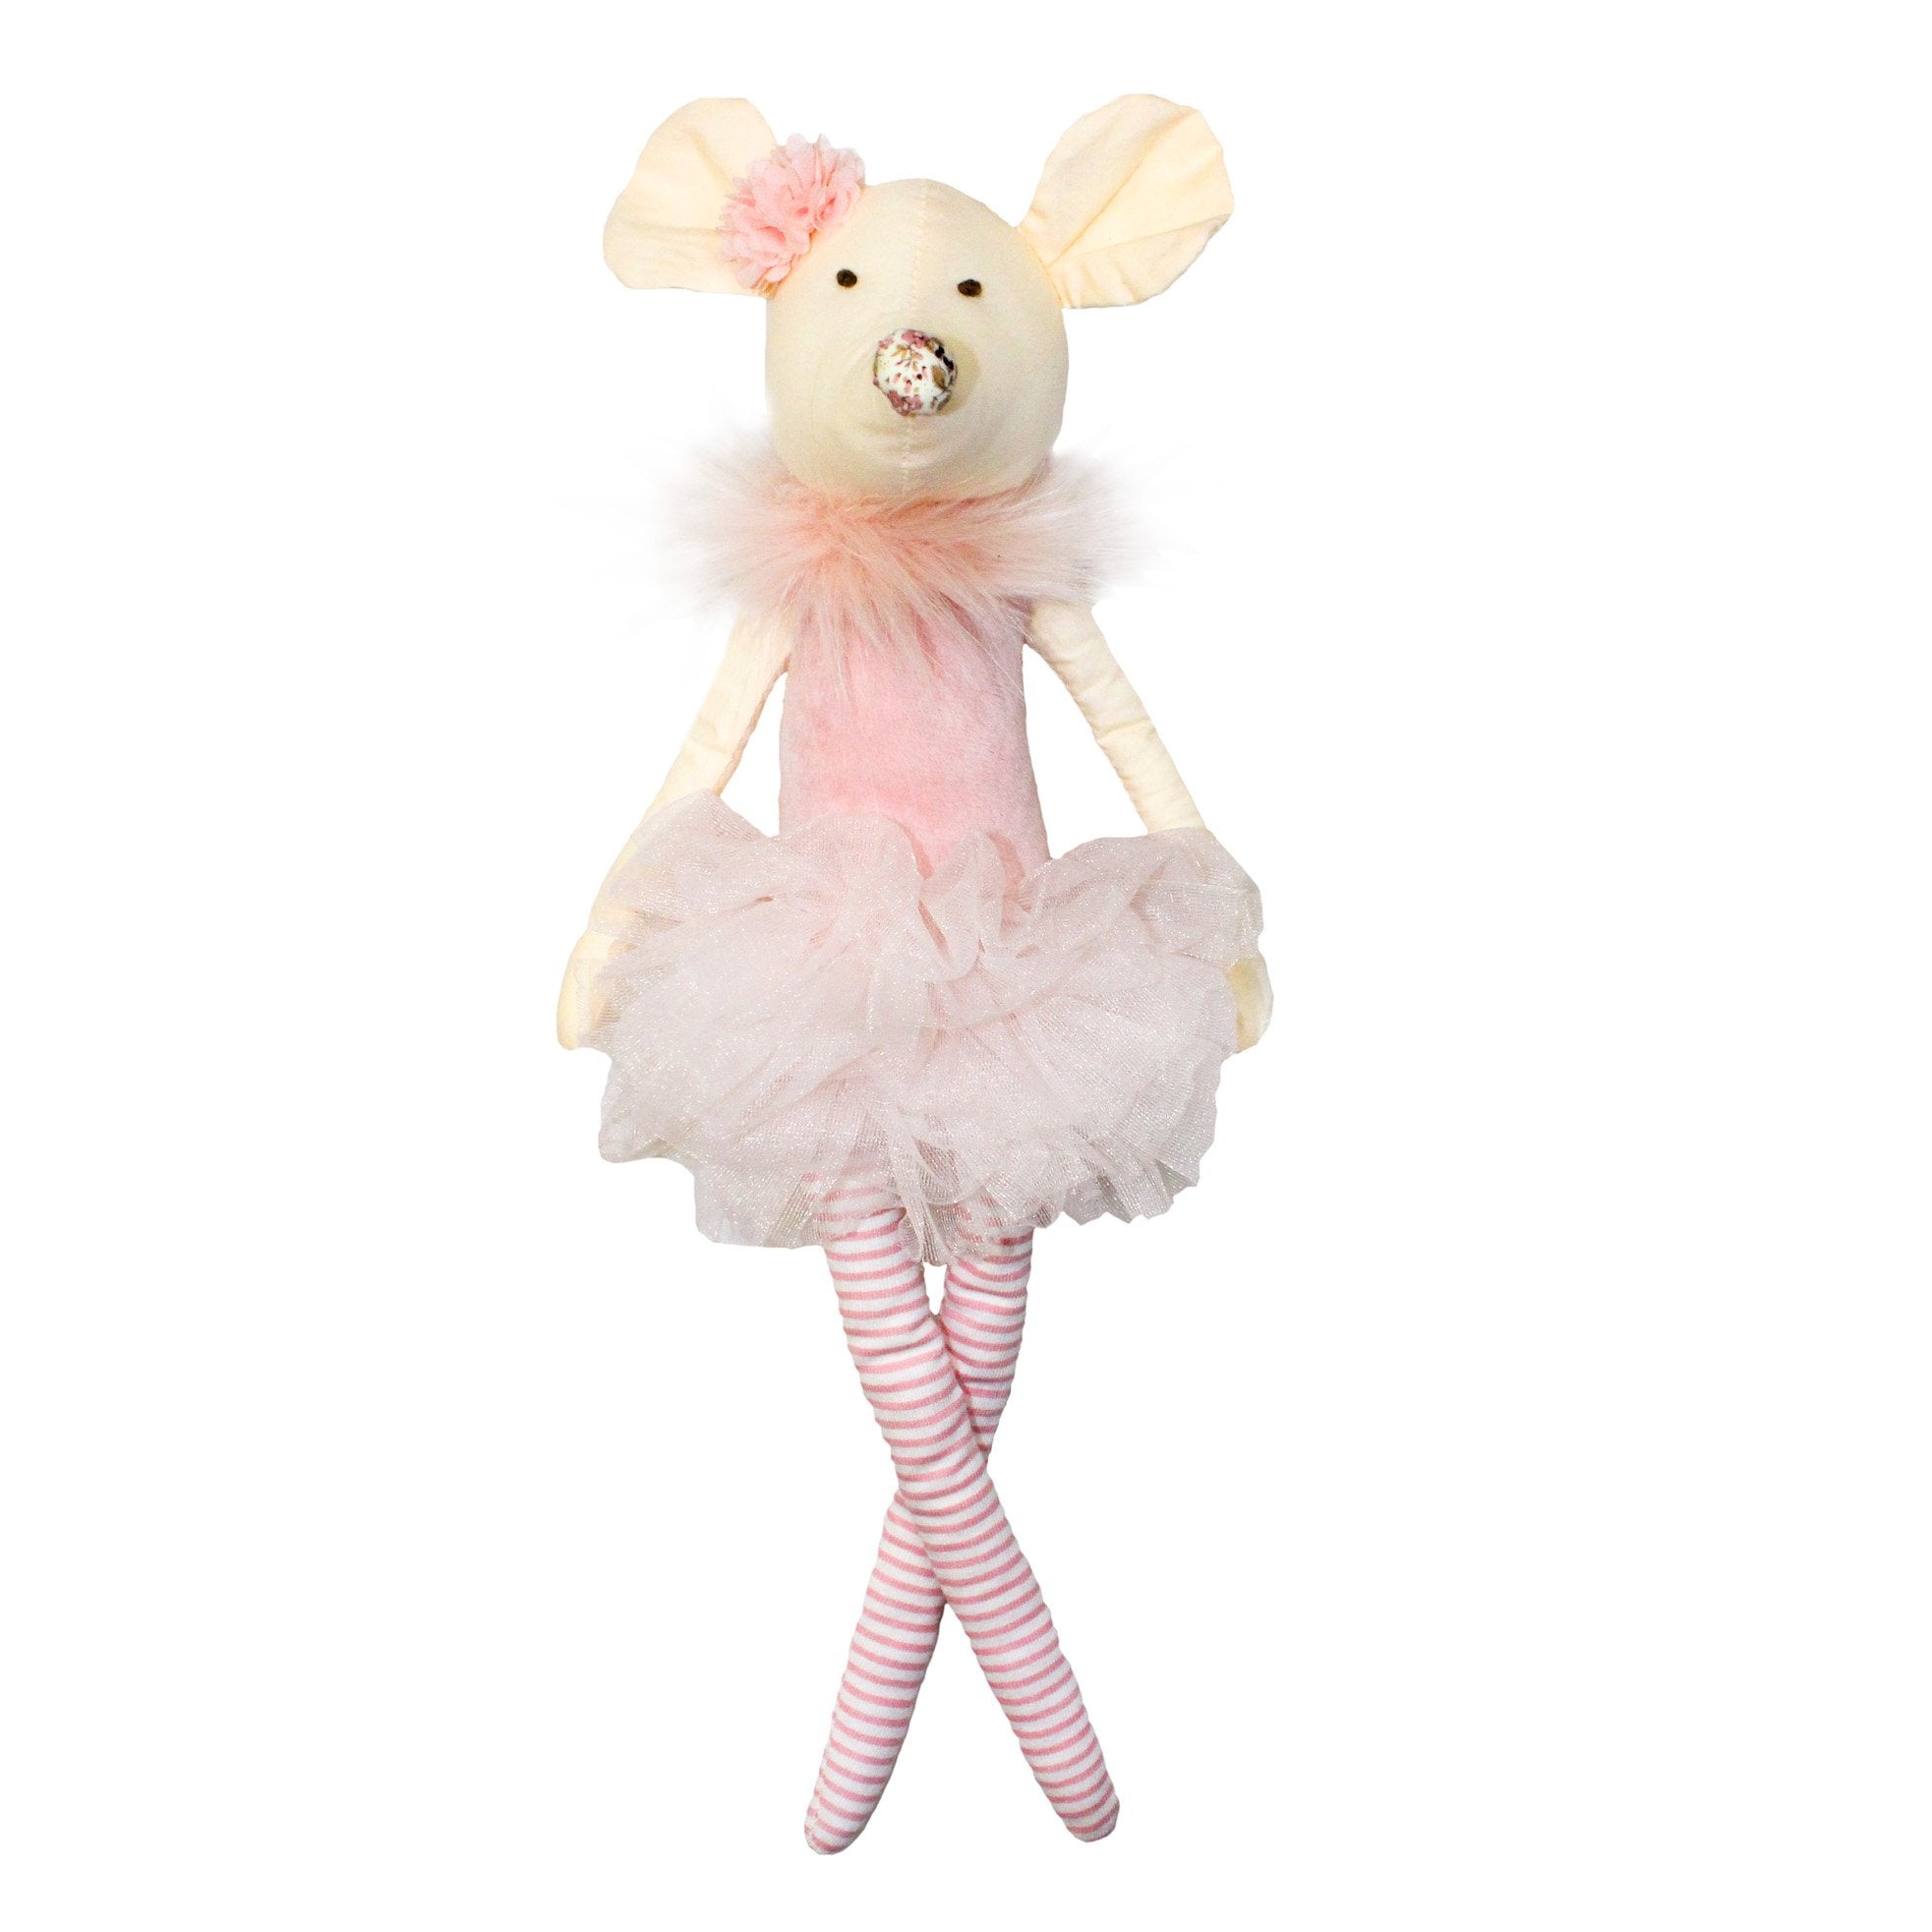 Ava Mouse Doll